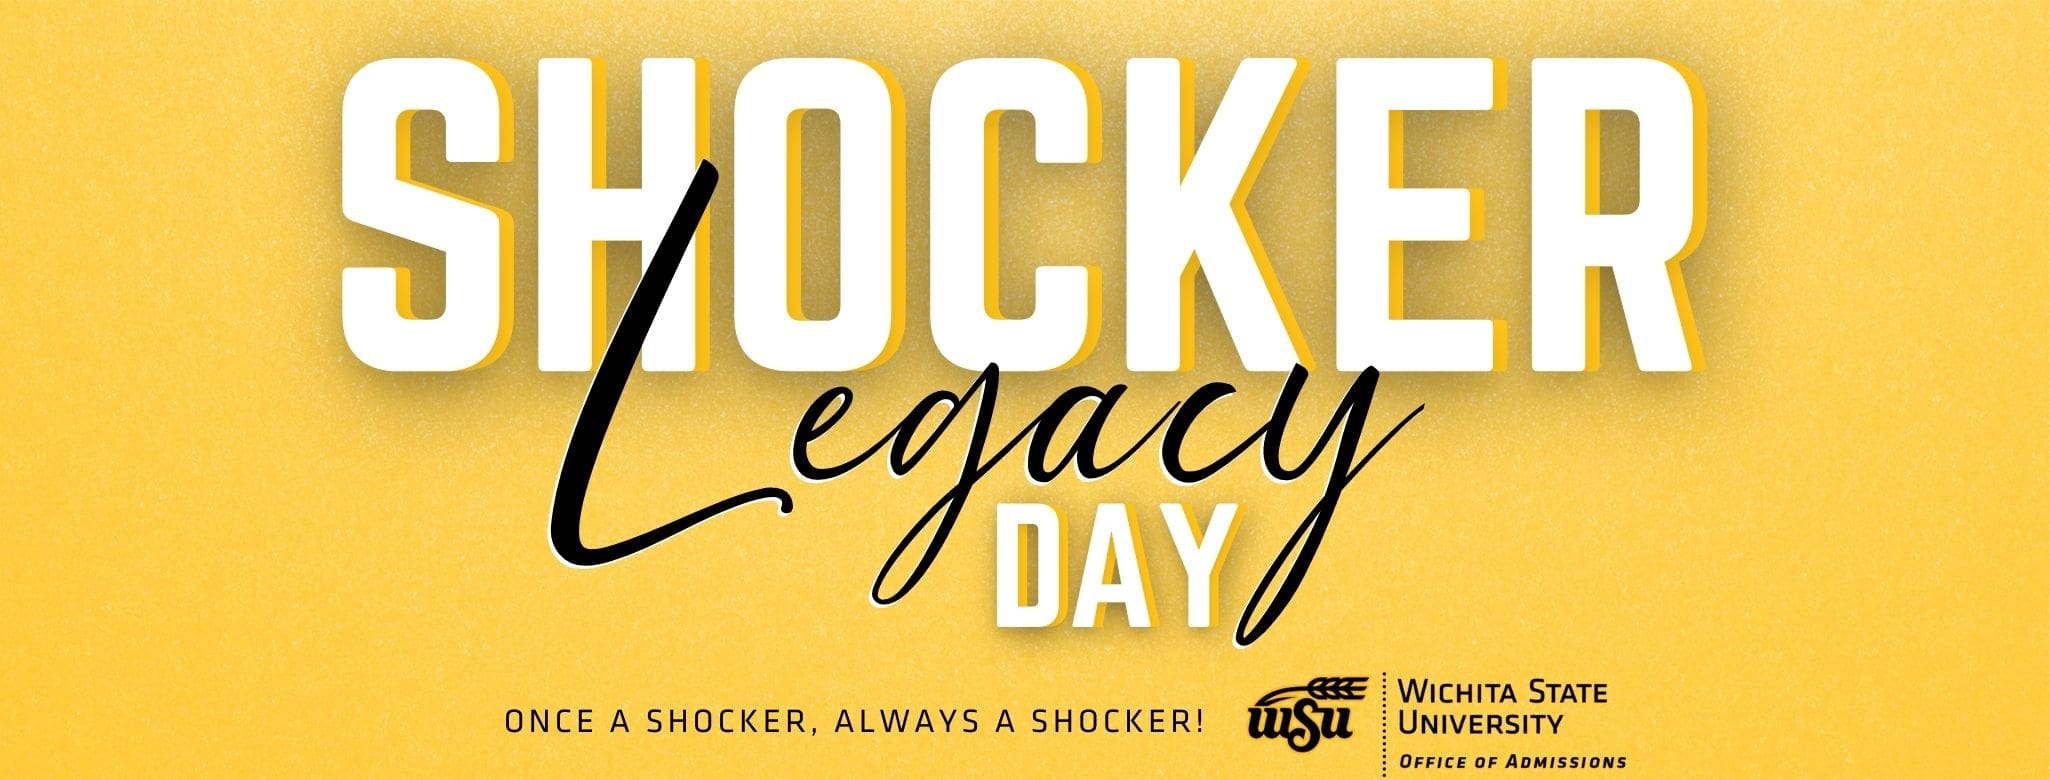 Yellow background with large print that says "Shocker Legacy Day." At the bottom, black text says "Once a Shocker, always a Shocker!" In the bottom right corner there is the Wichita State logo with the text "Wichita State University Office of Admissions"